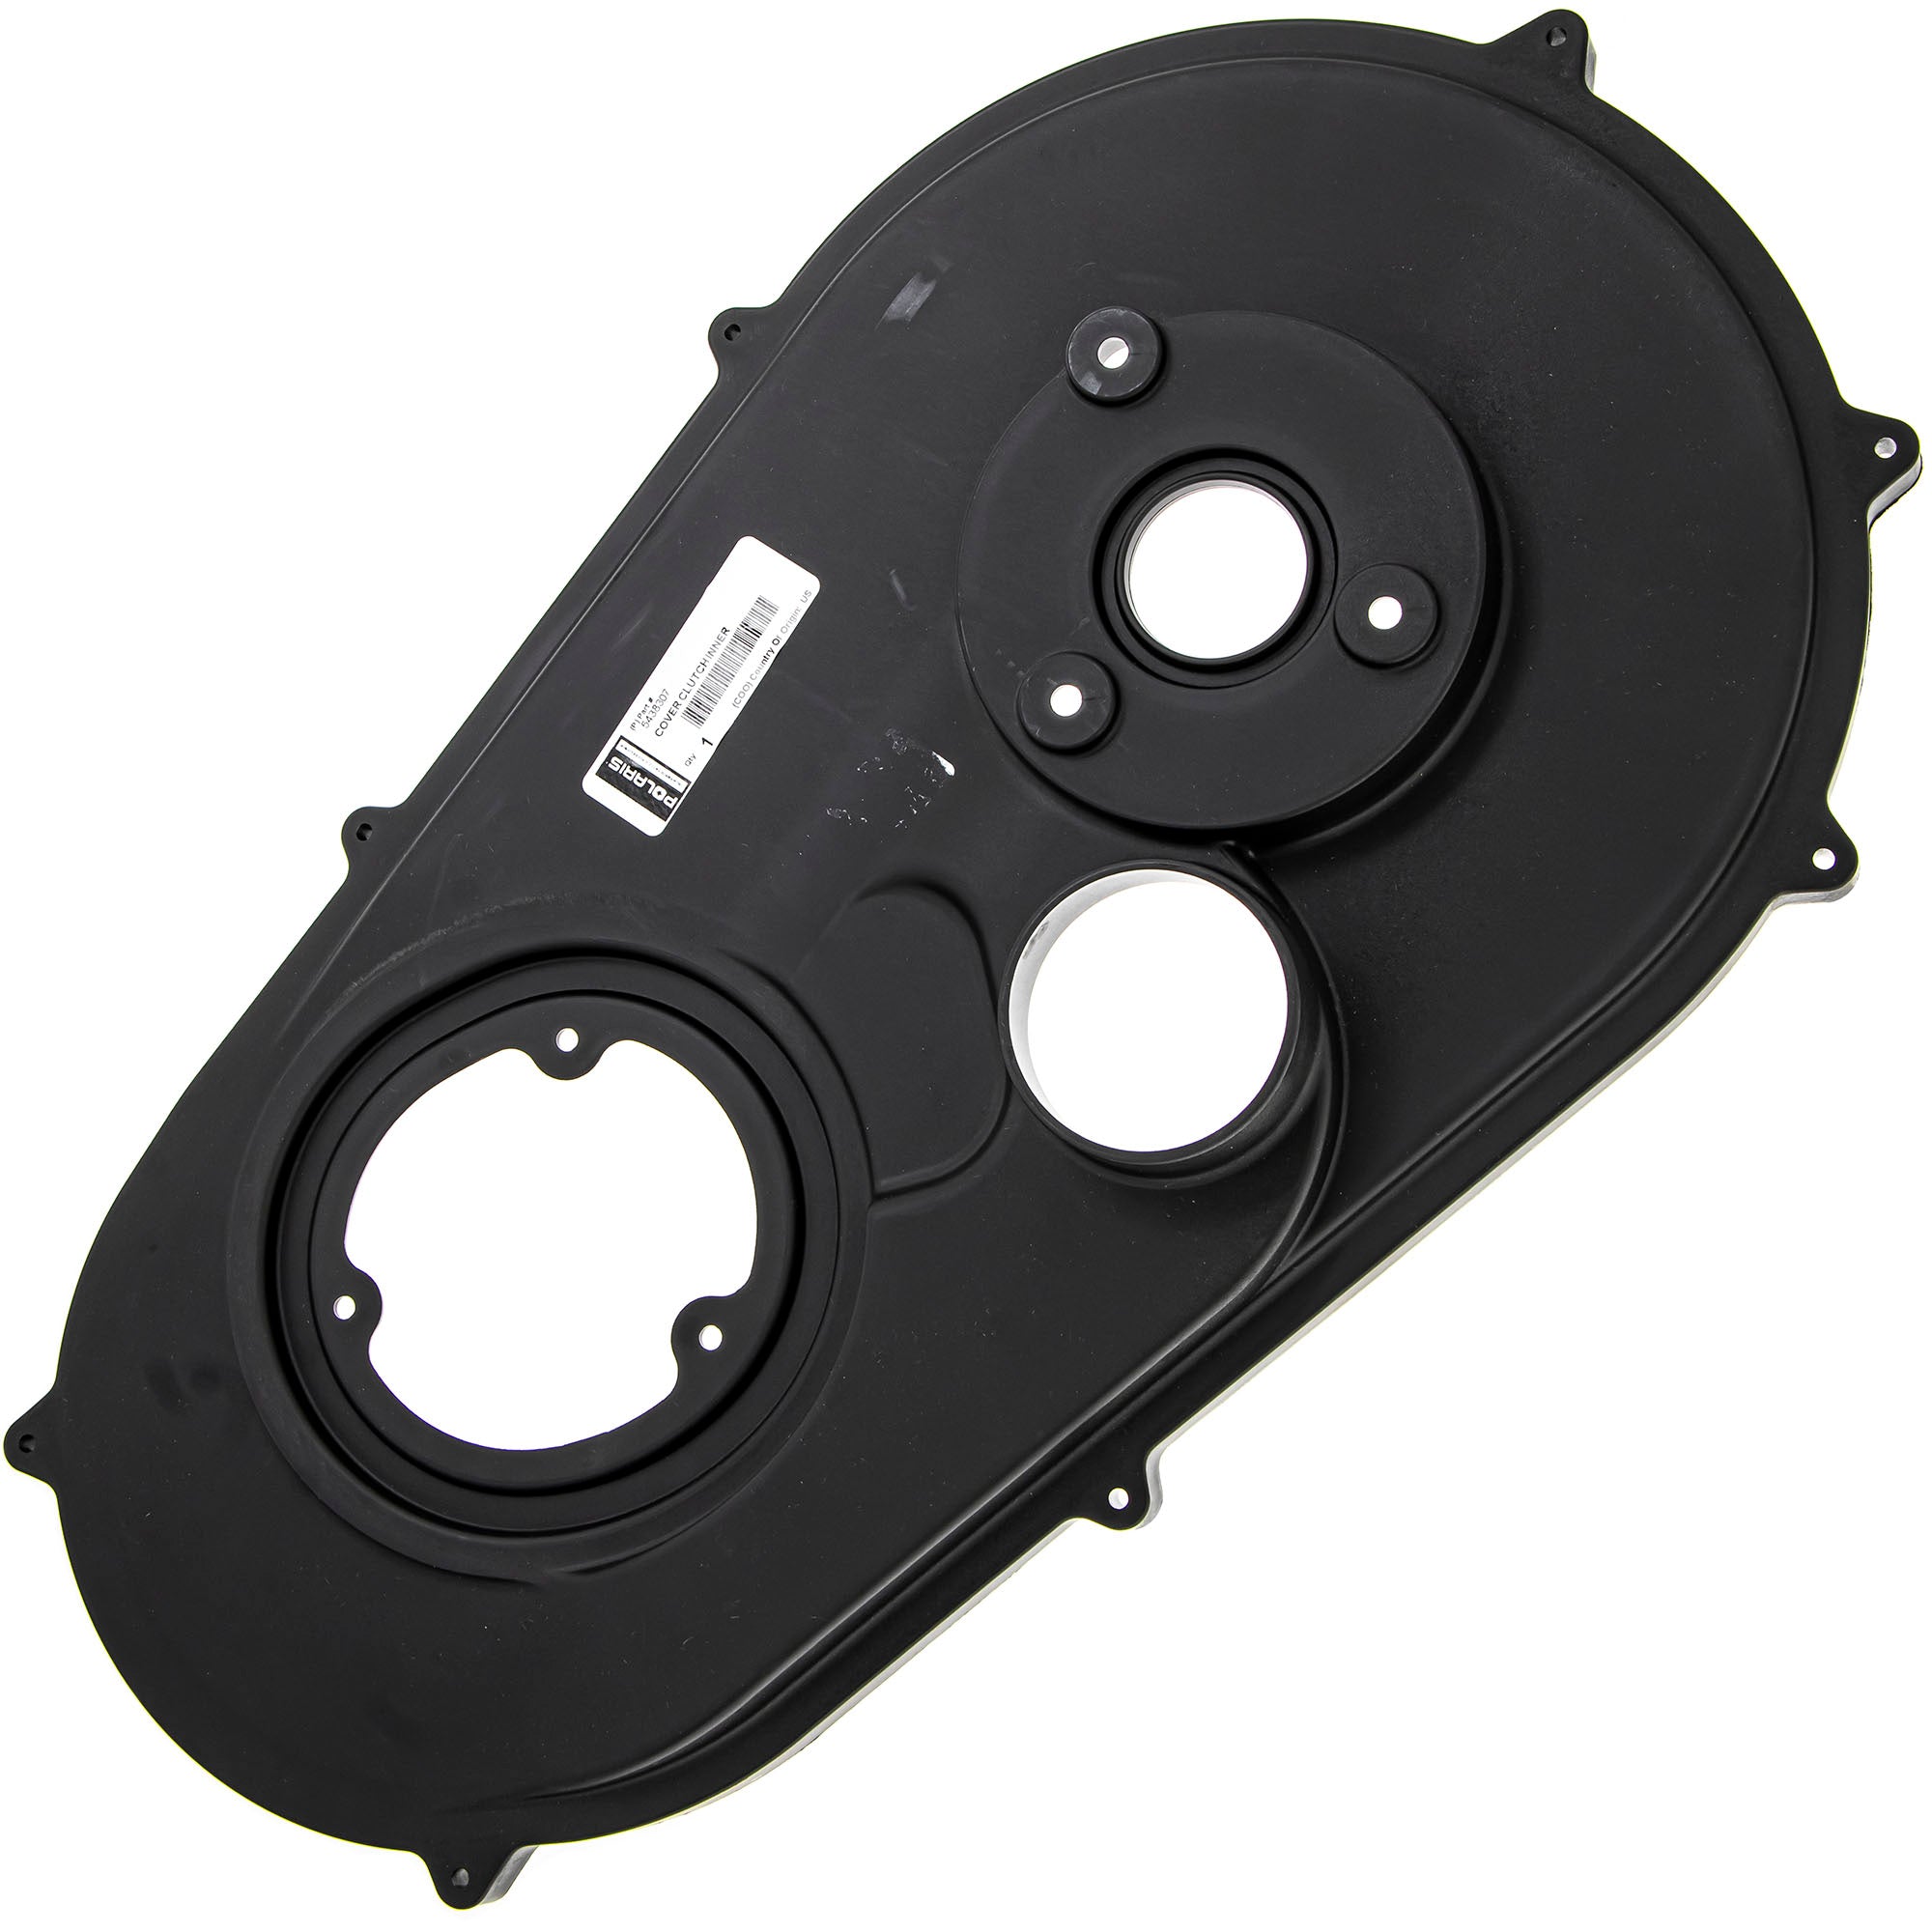 Polaris 5438307 Clutch Cover RZR 800 4 EPS Limited S